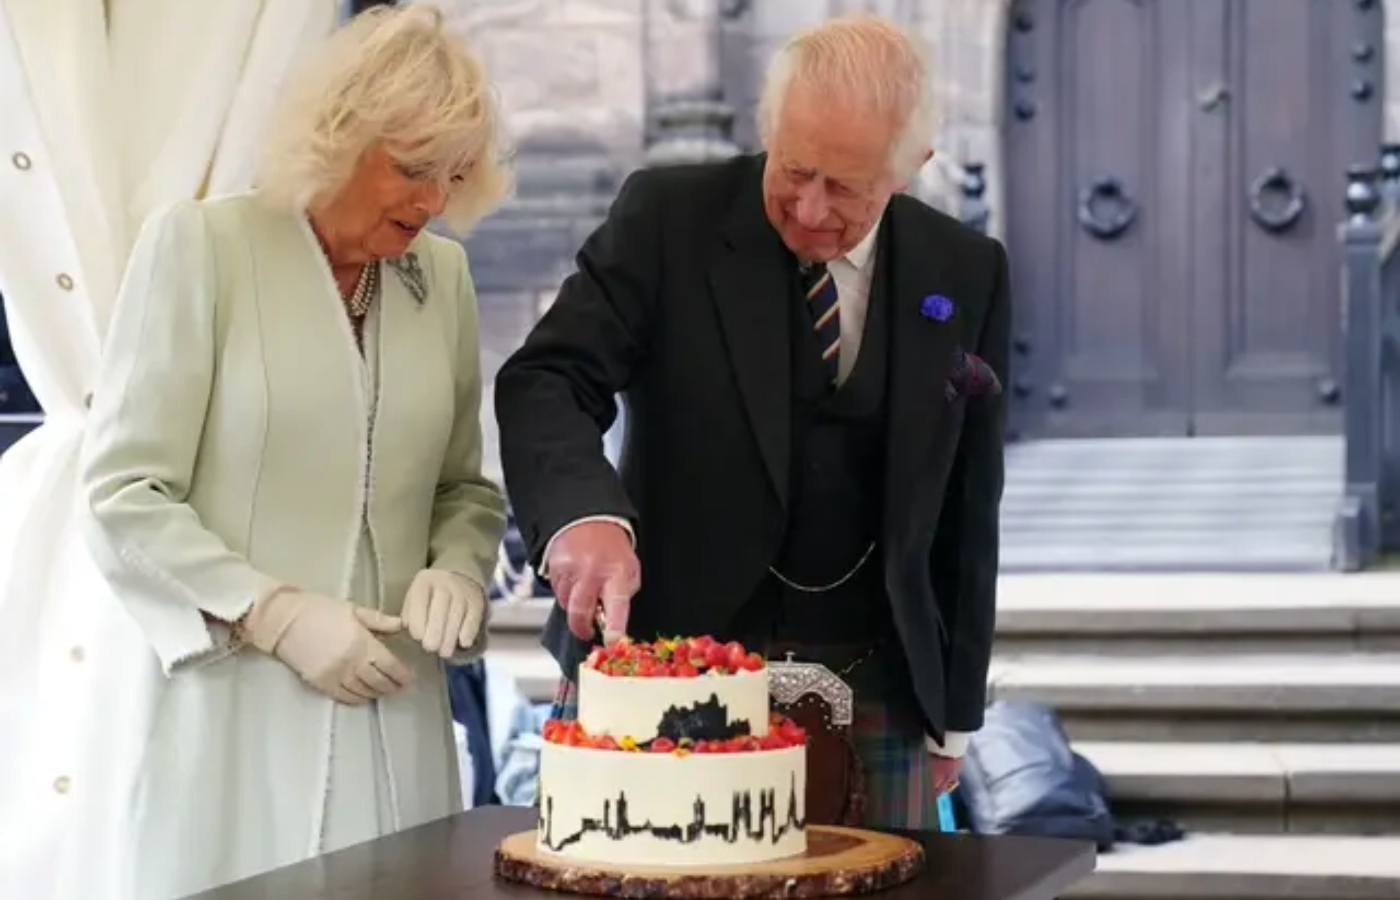 The King and Queen cut a cake made by 2020 Great British Bake Off winner Peter Sawkins.